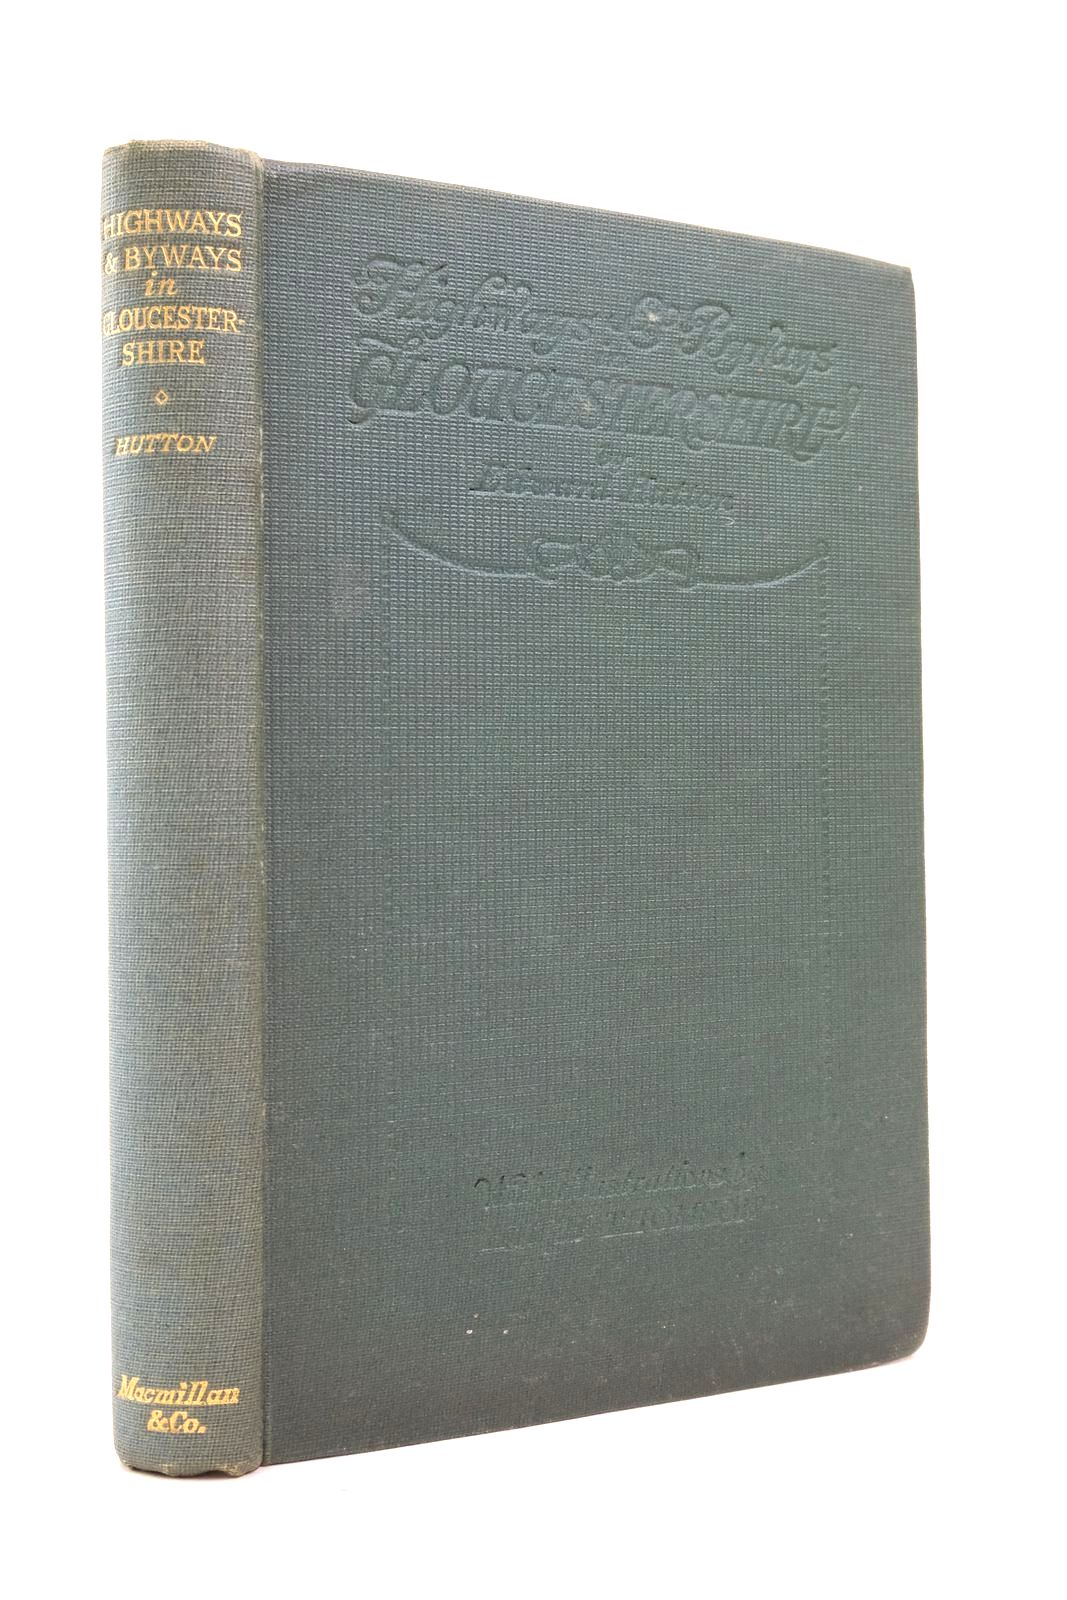 Photo of HIGHWAYS AND BYWAYS IN GLOUCESTERSHIRE written by Hutton, Edward illustrated by Thomson, Hugh published by Macmillan &amp; Co. Ltd. (STOCK CODE: 2137604)  for sale by Stella & Rose's Books